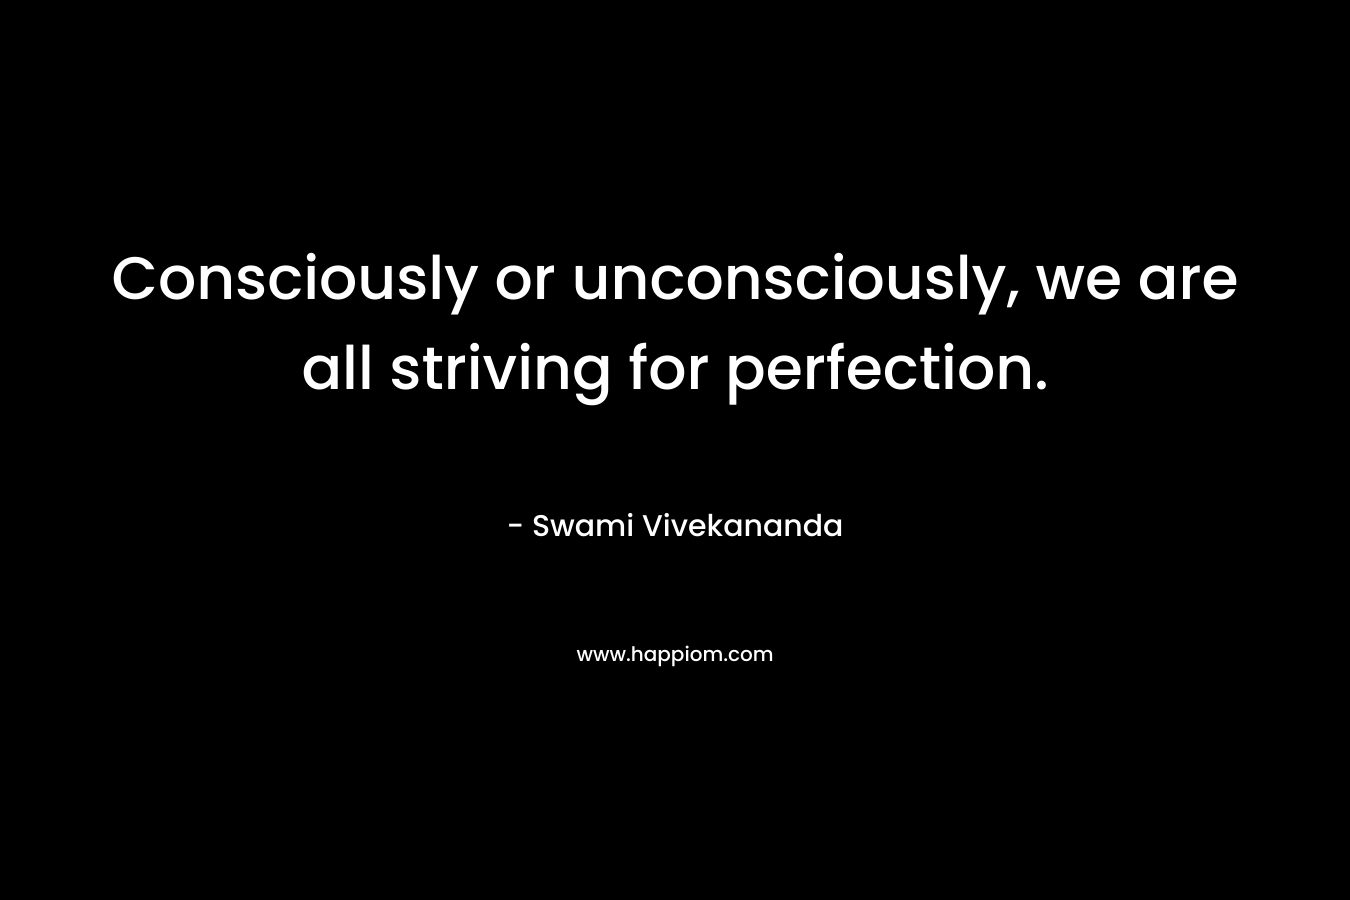 Consciously or unconsciously, we are all striving for perfection. – Swami Vivekananda